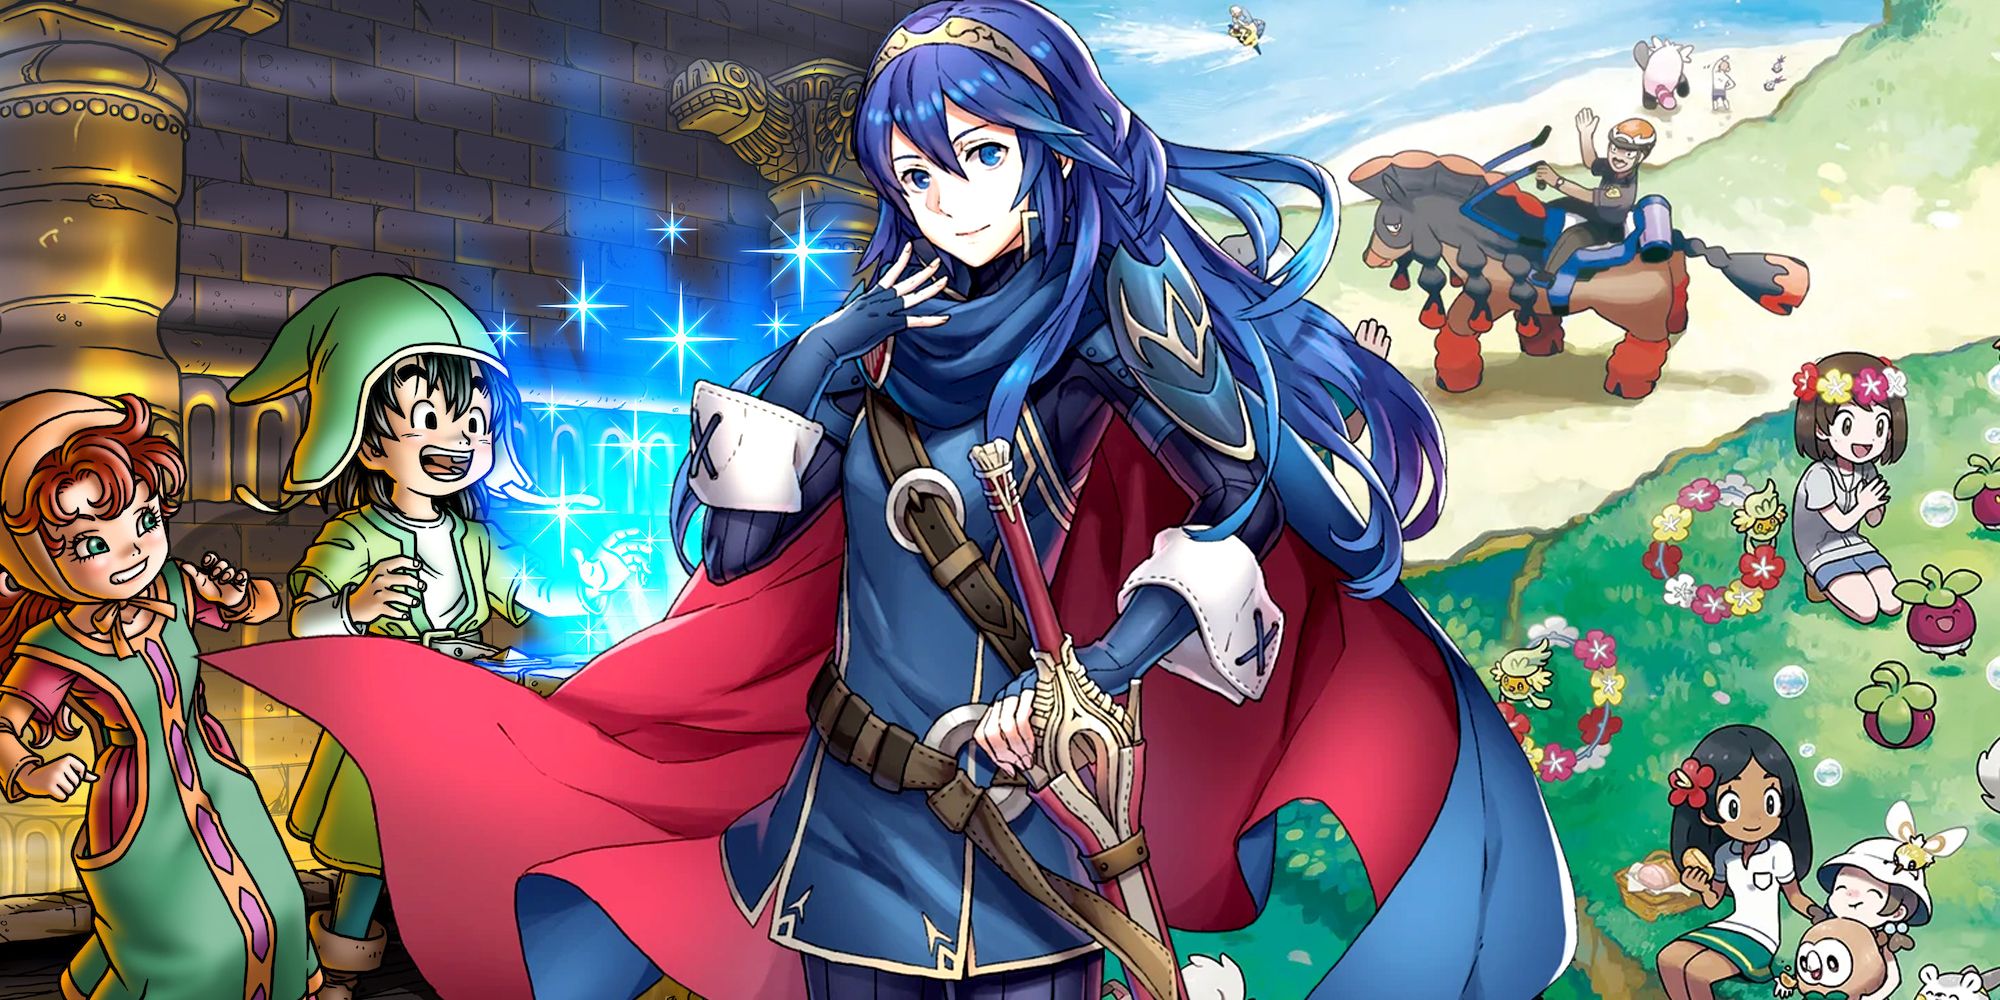 Lucina from Fire Emblem Awakening in front of art for Dragon Quest 7 and Pokemon Sun.